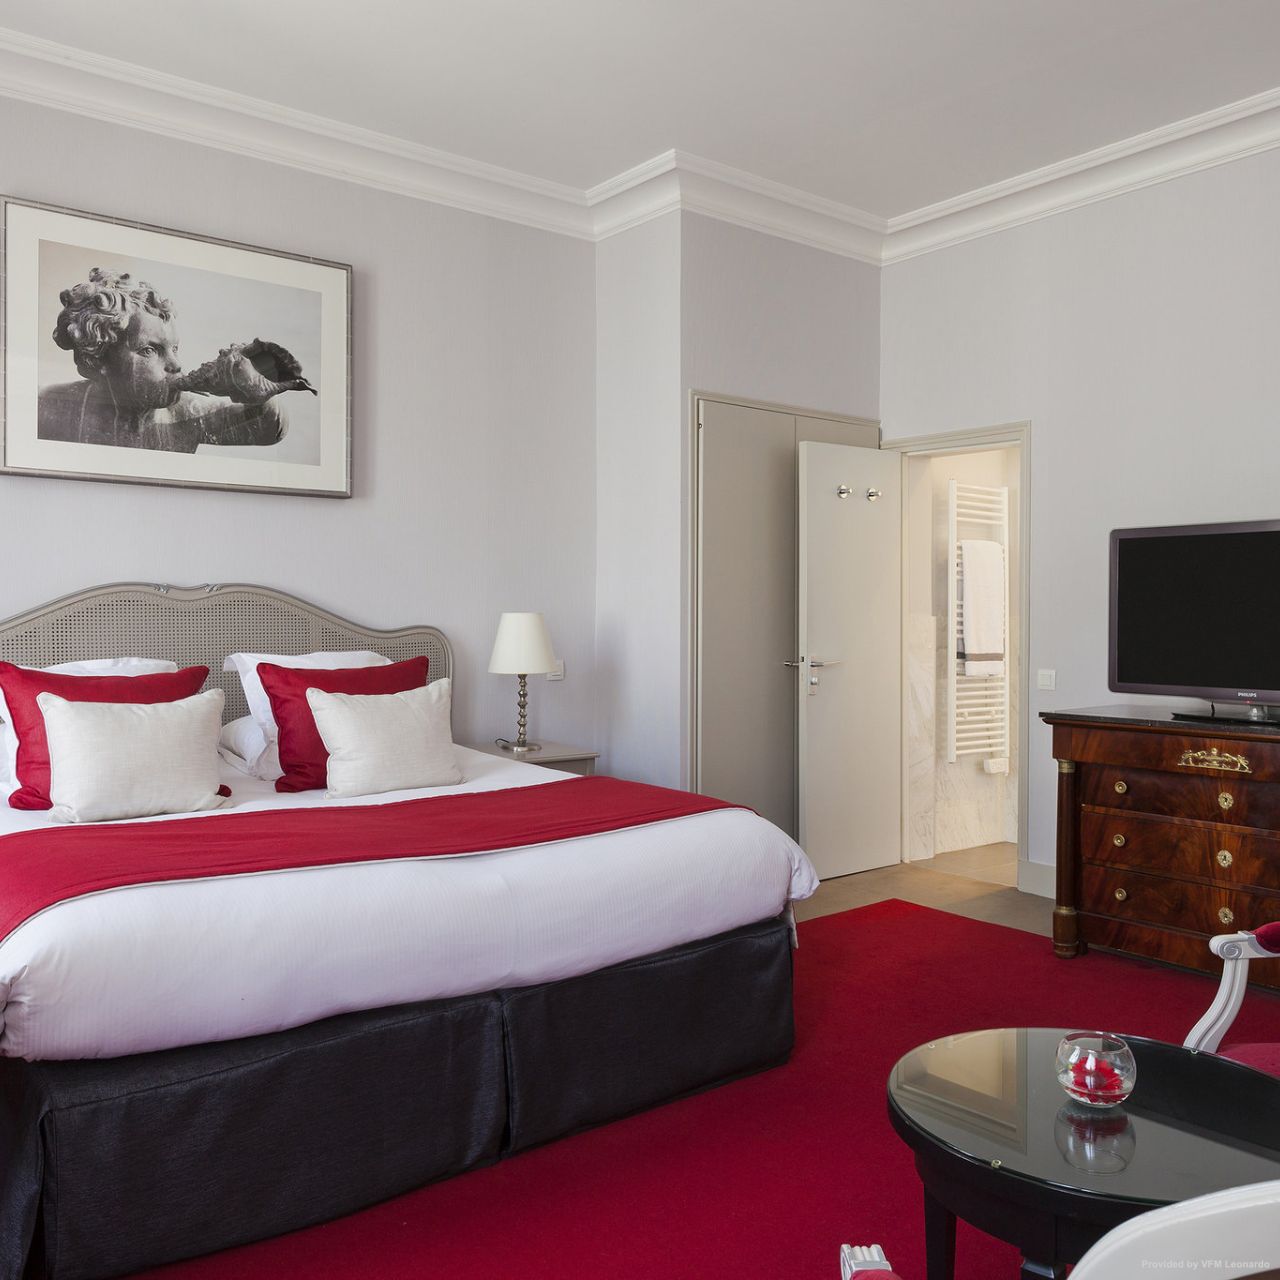 Clarion Hotel Chateau Belmont - Tours - Great prices at HOTEL INFO